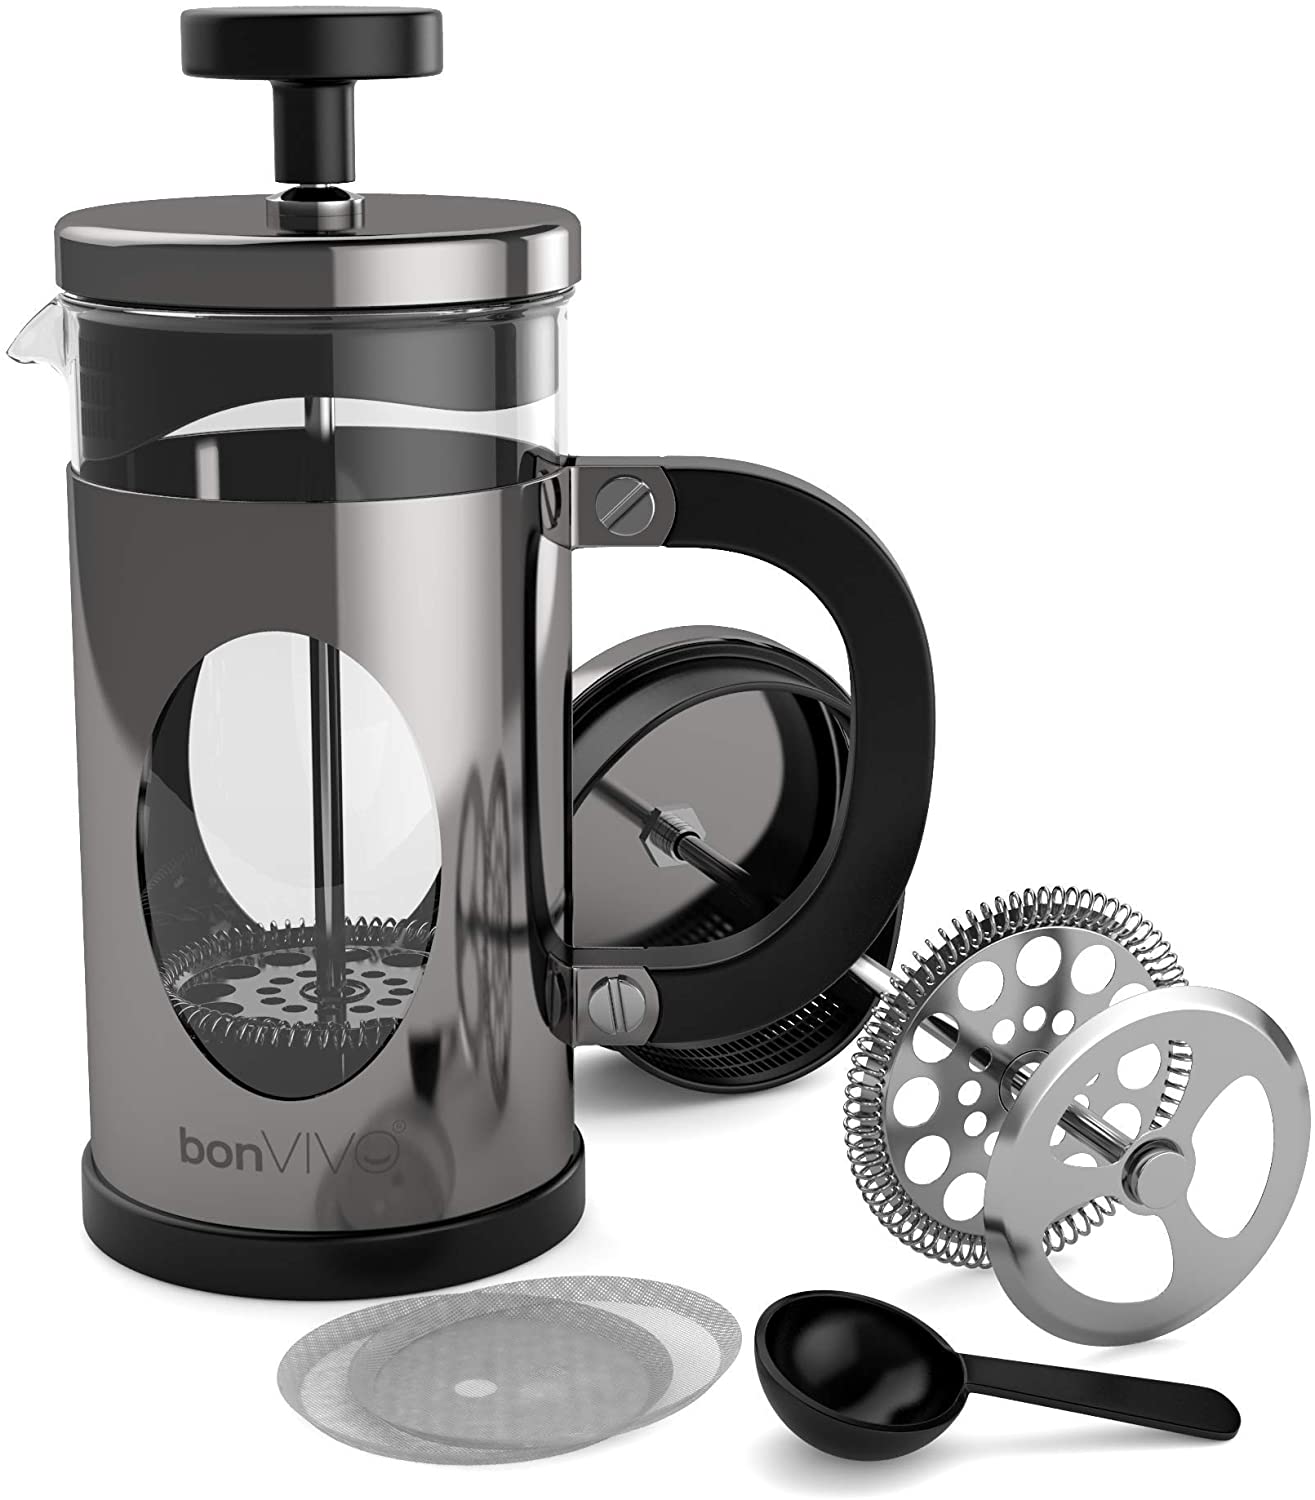 BonVivo® GAZETARO Designer Coffee Maker and French Press Coffee Maker, Glass Coffee Pot with Stainless Steel Frame & Stainless Steel Filter